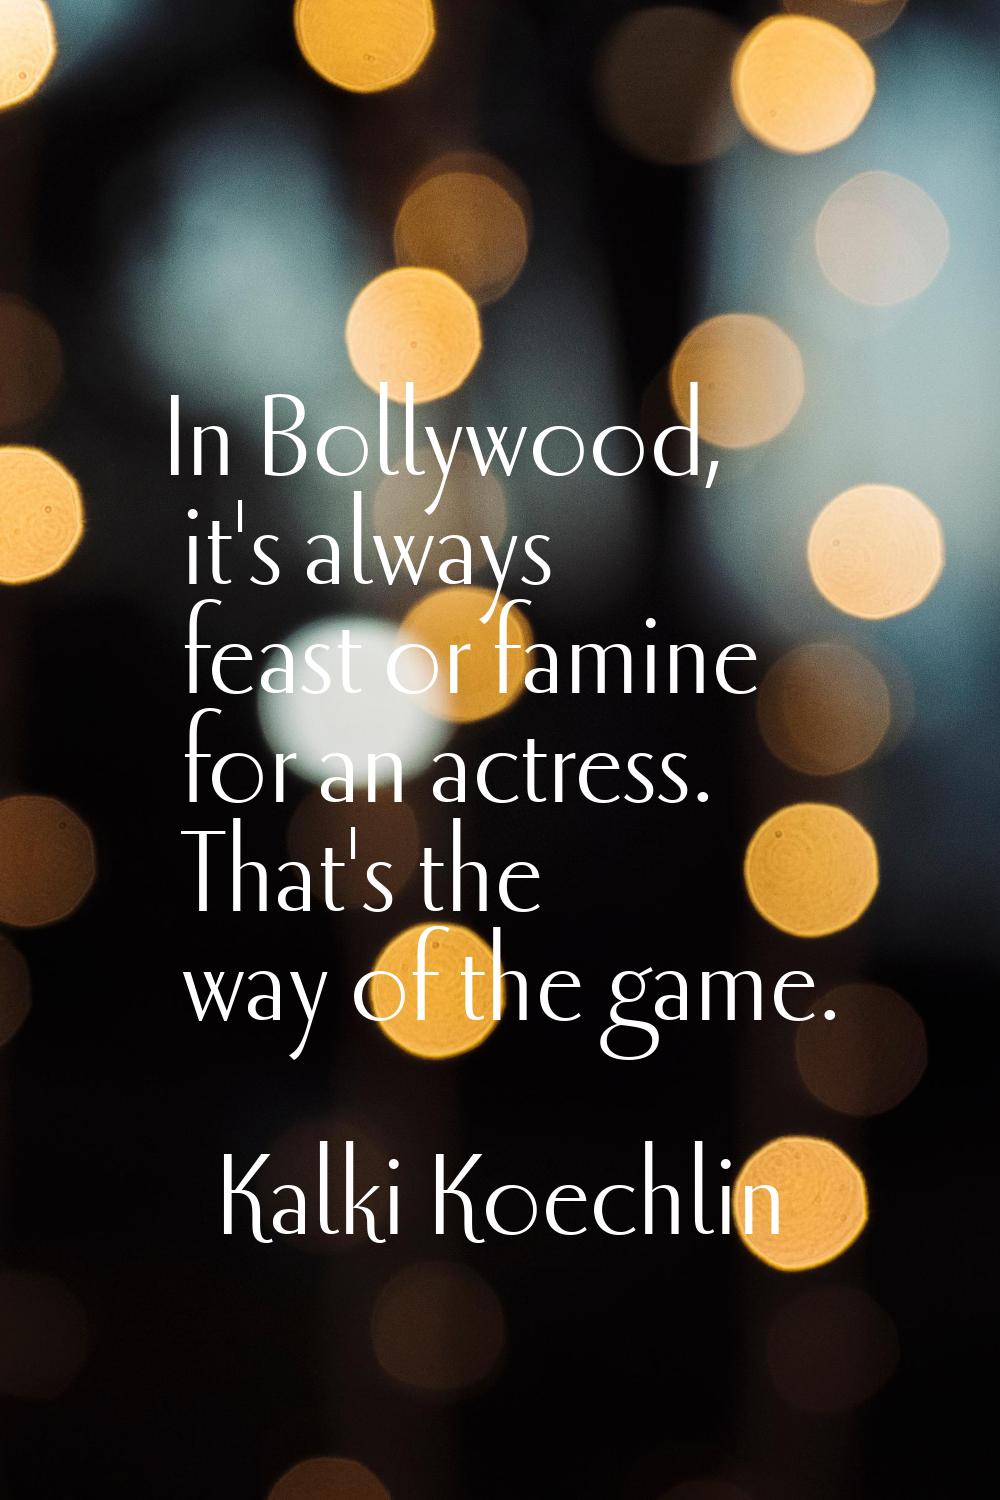 In Bollywood, it's always feast or famine for an actress. That's the way of the game.